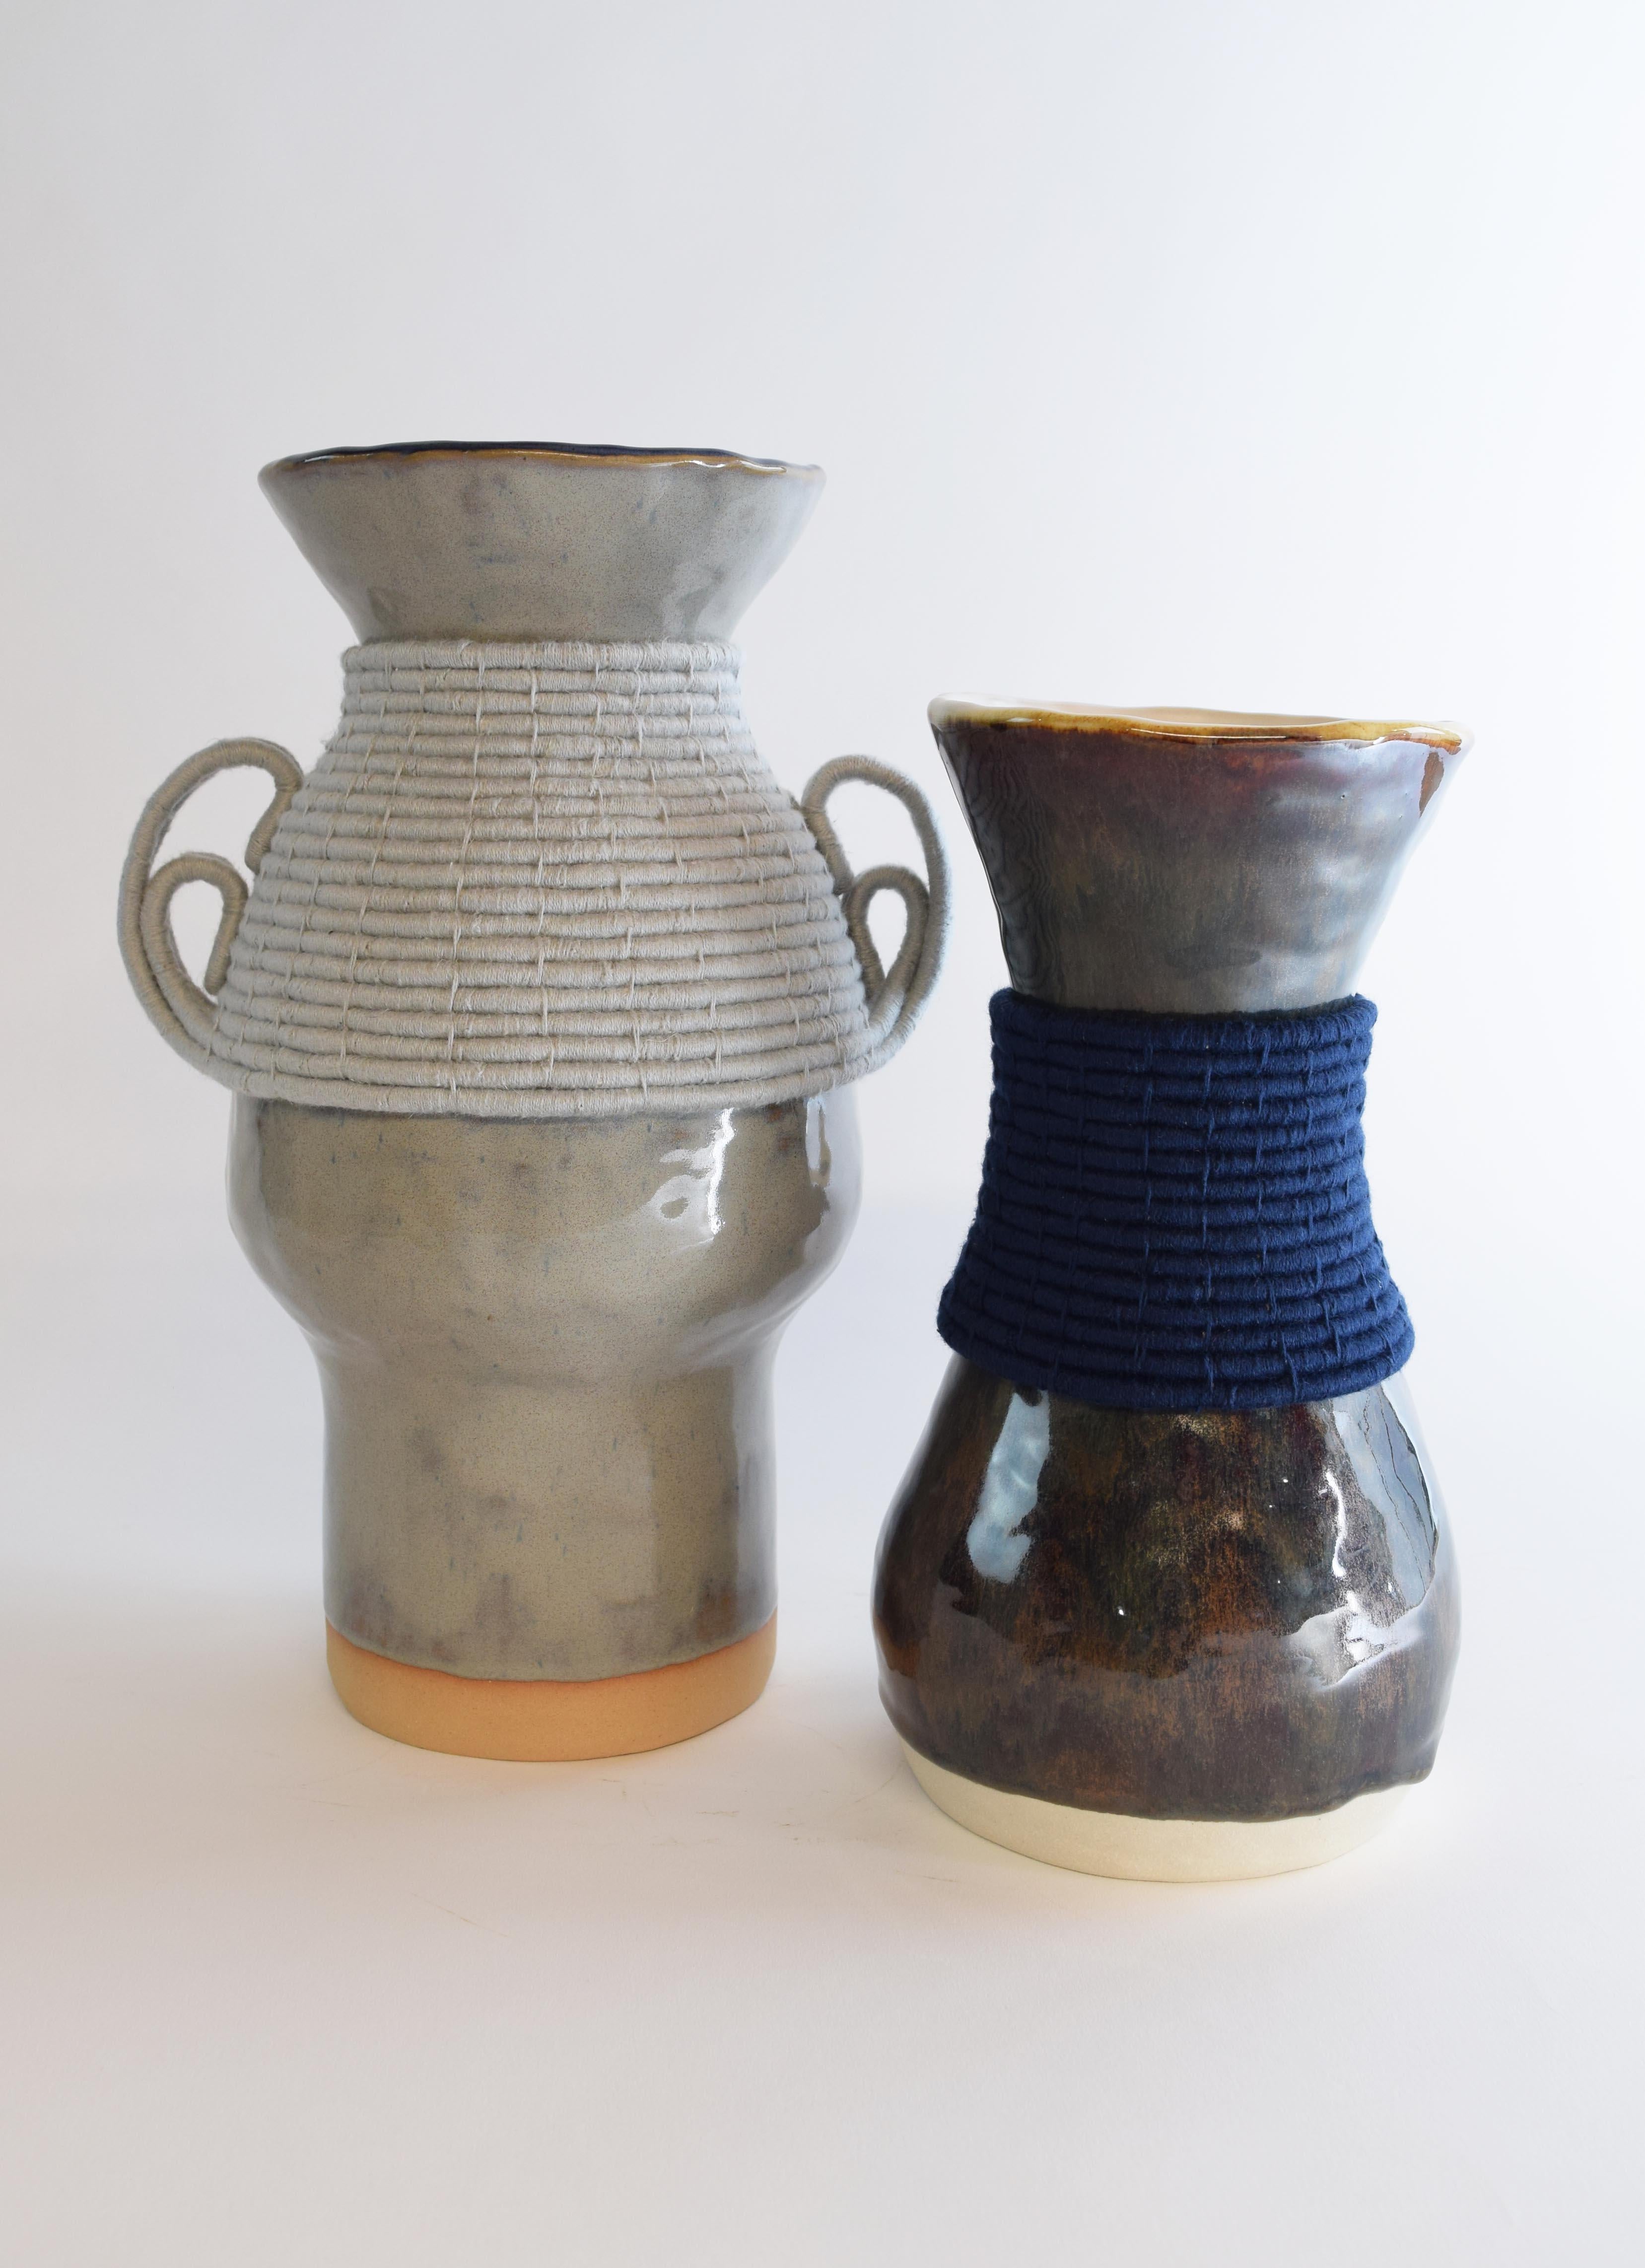 Hand-Knotted One of a Kind Ceramic Vase #768, Multi-Colored Glaze & Woven Navy Cotton Detail